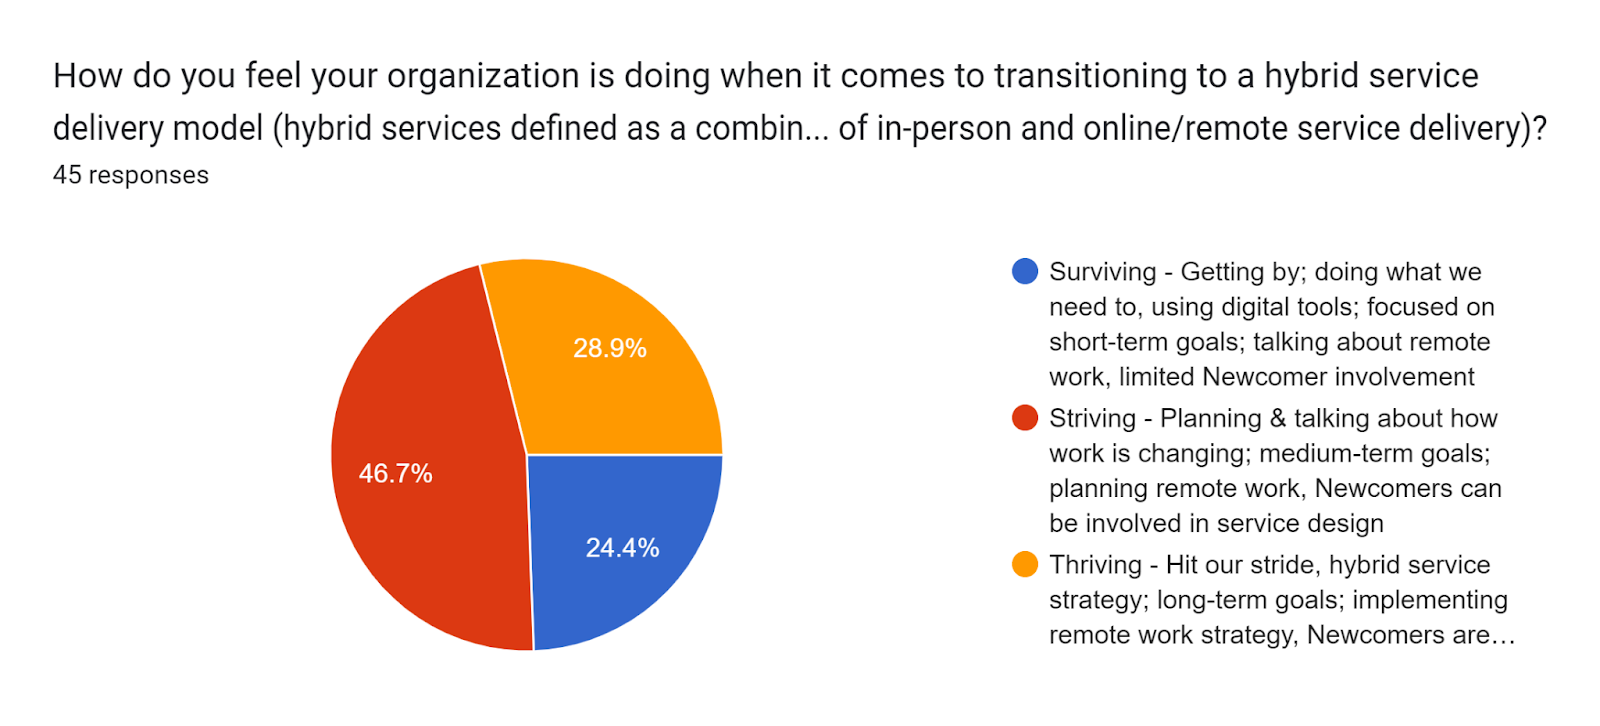 Forms response chart. Question title: How do you feel your organization is doing when it comes to transitioning to a hybrid service delivery model (hybrid services defined as a combination of in-person and online/remote service delivery)?. Number of responses: 45 responses.